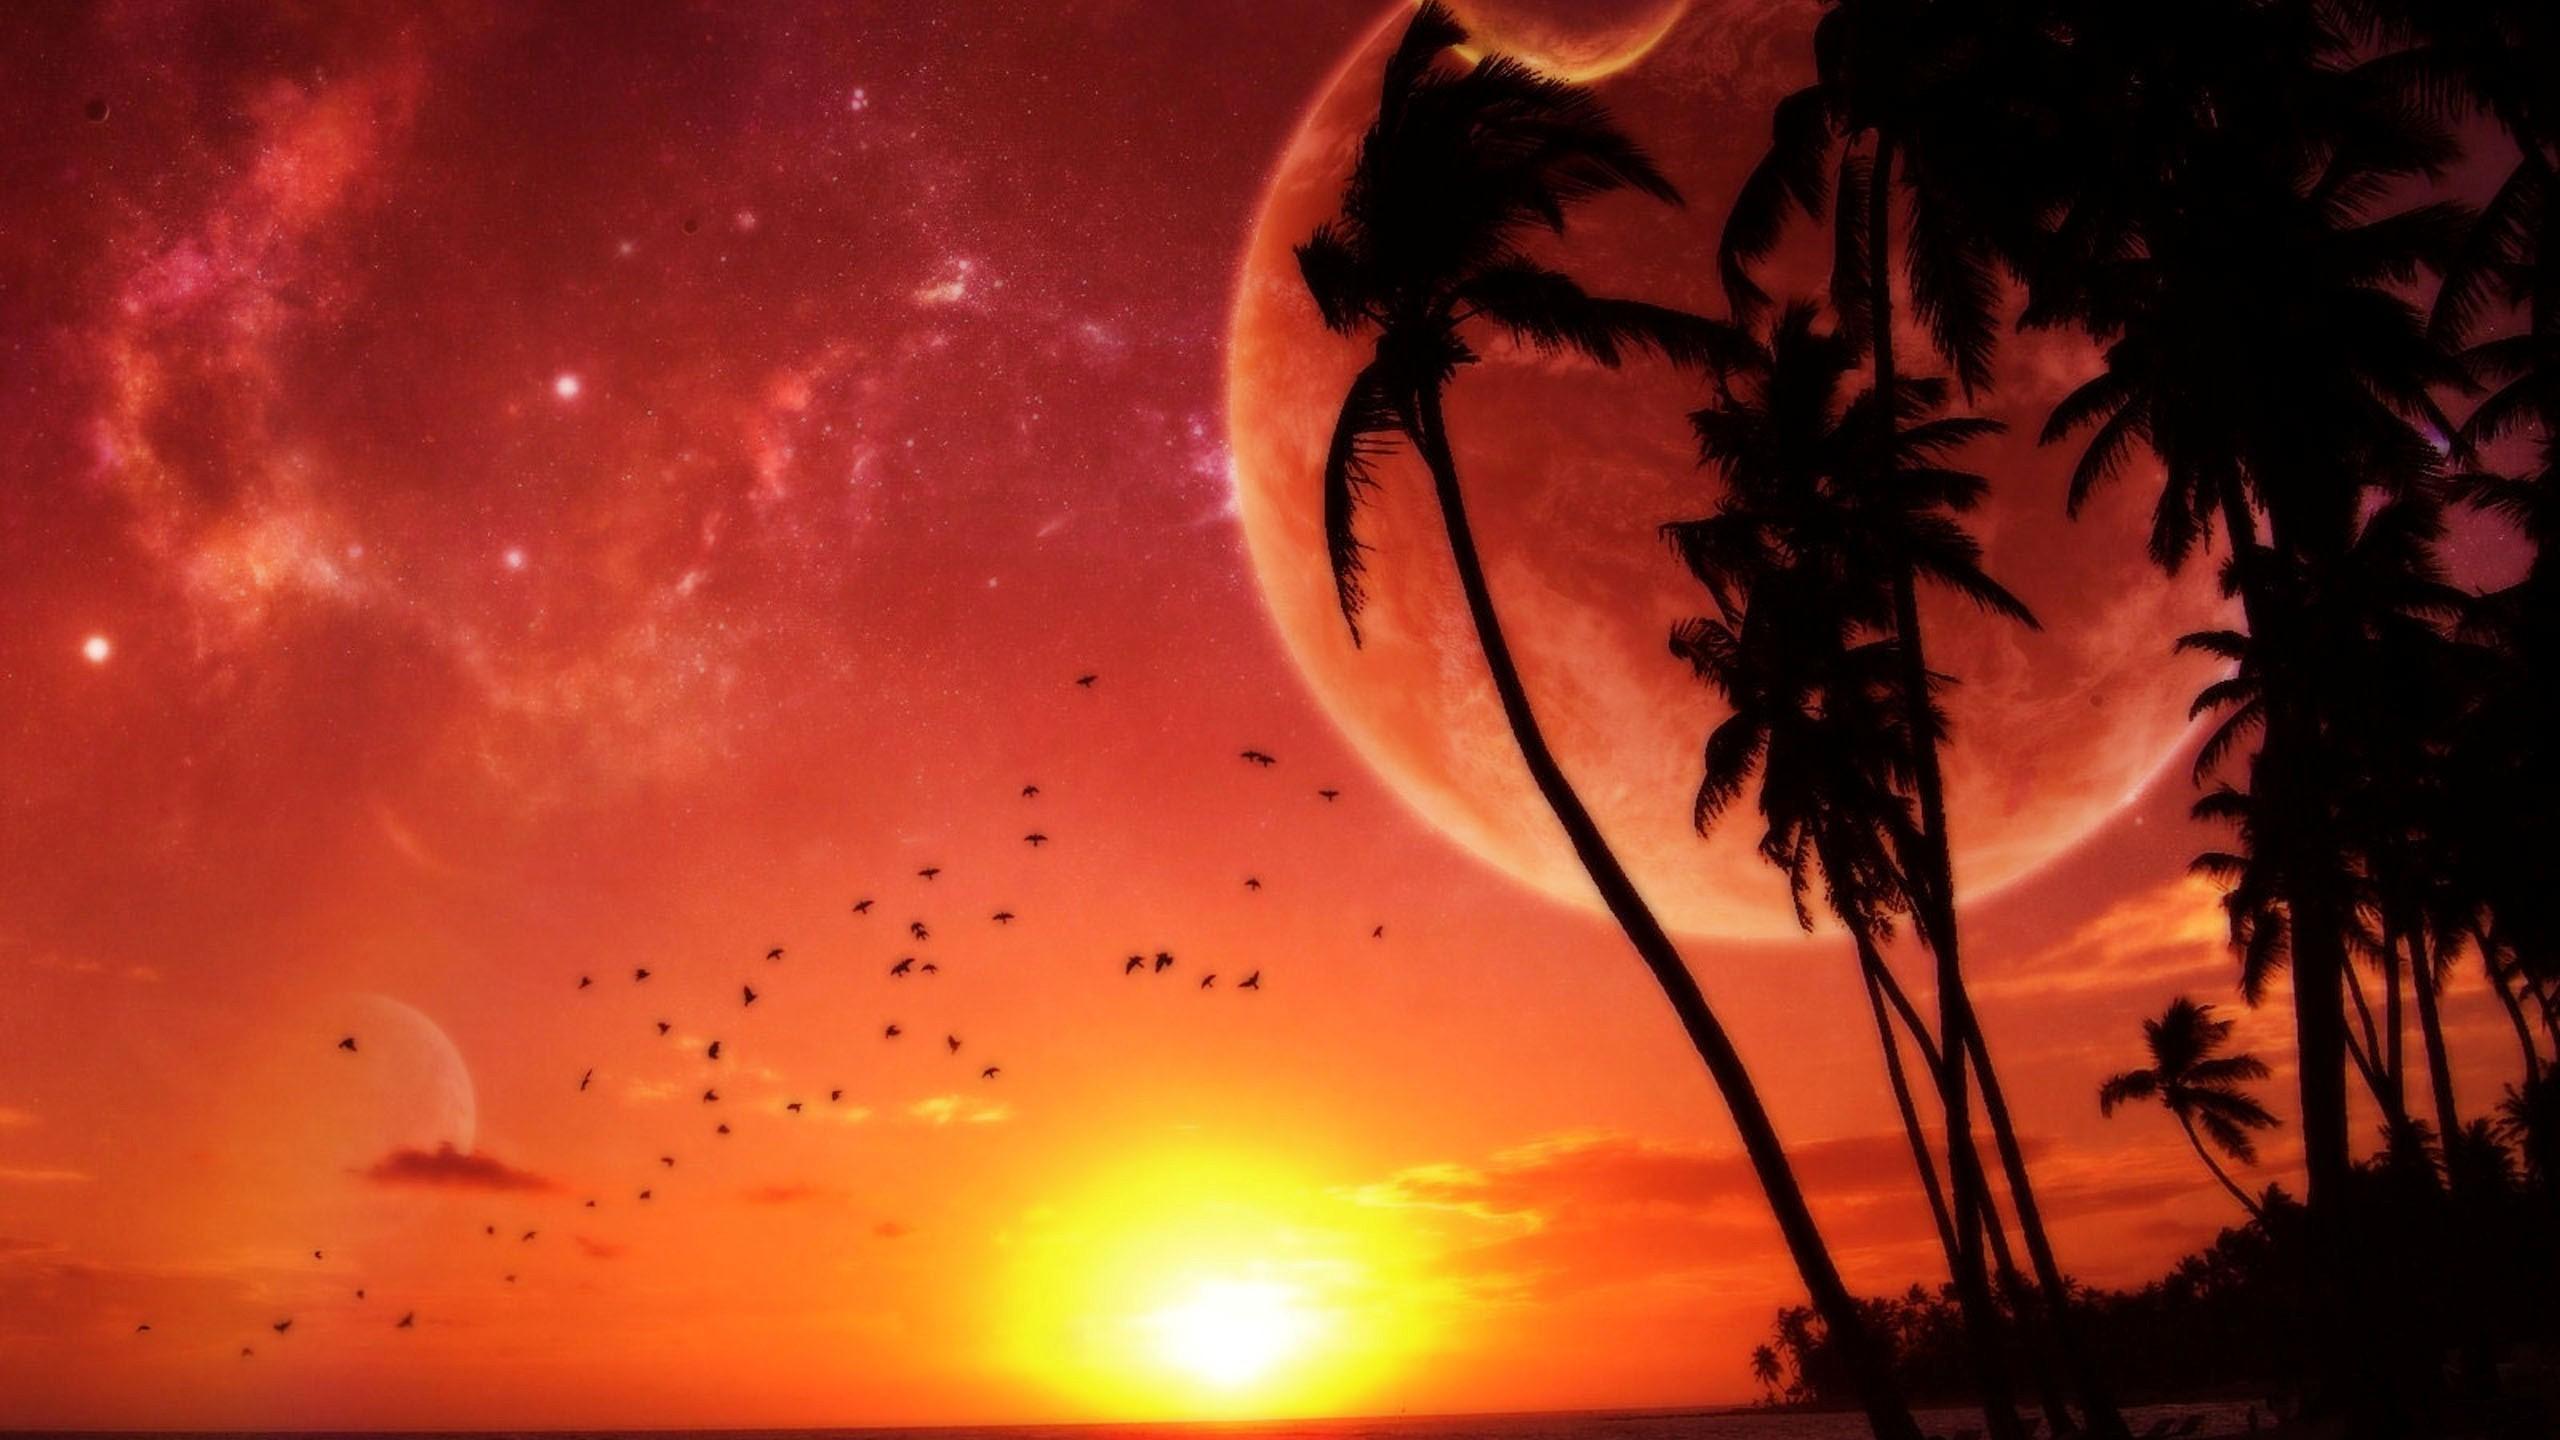 Space Sunset Wallpapers